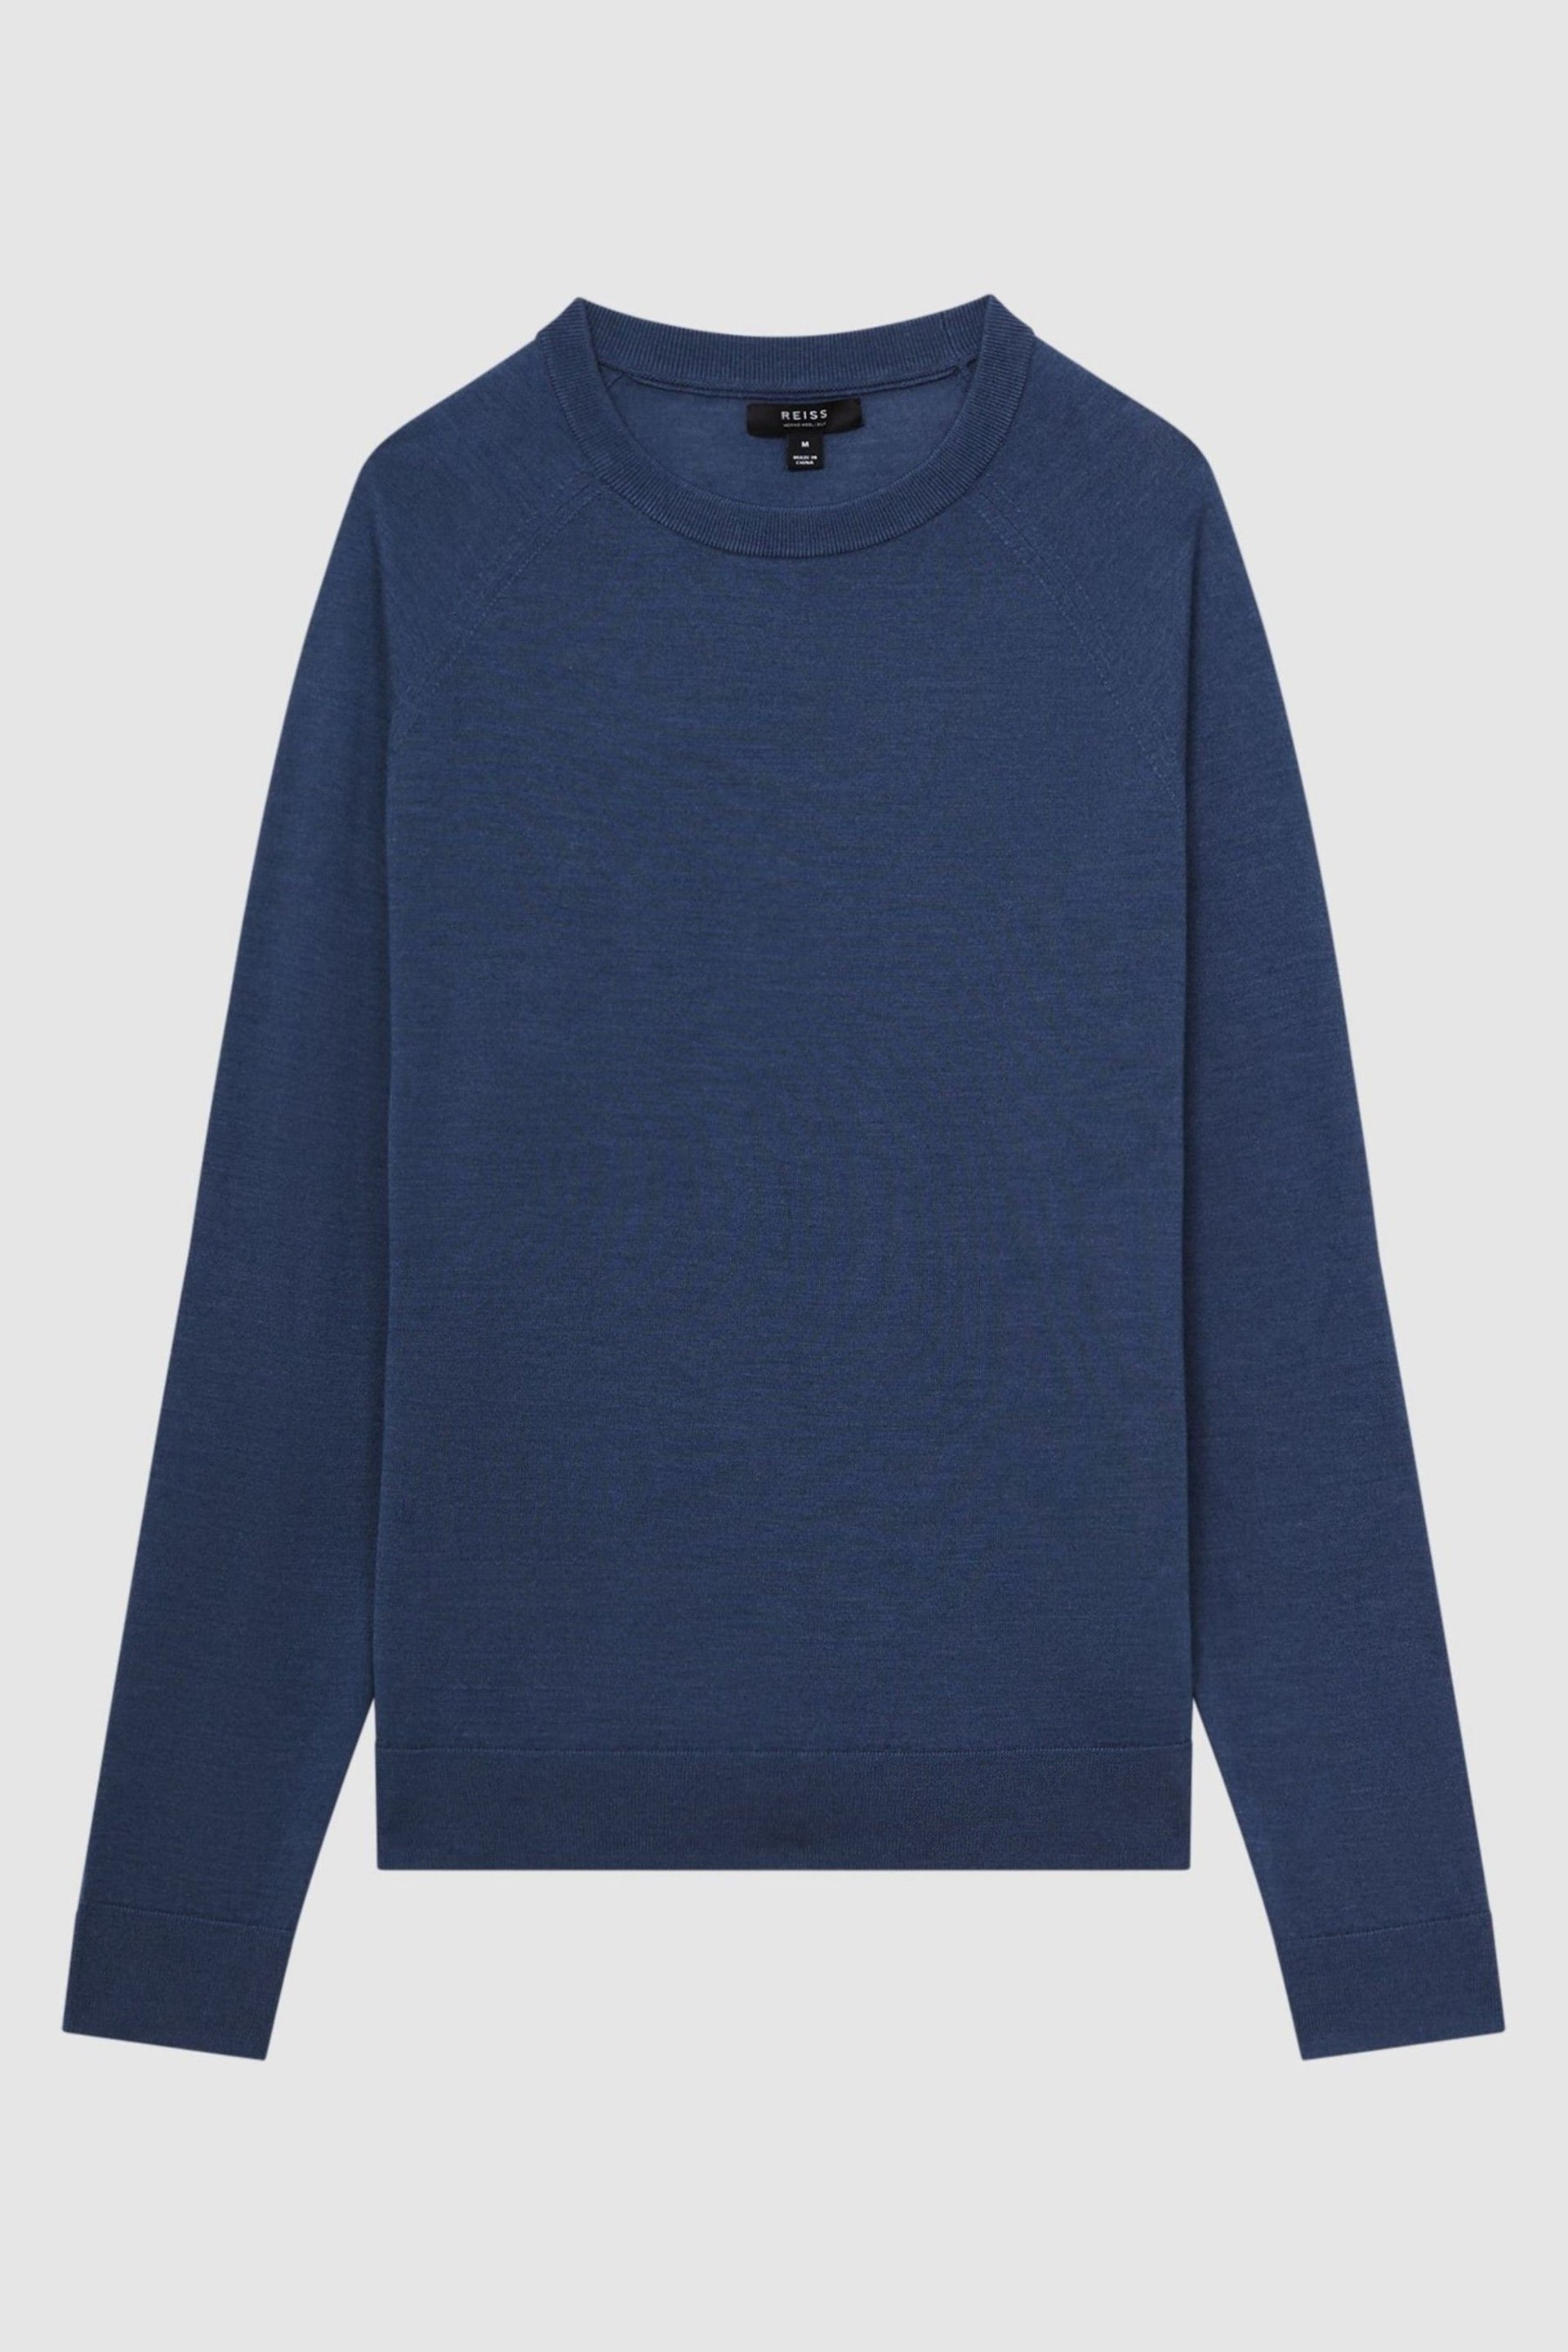 Reiss Airforce Blue Tinto Merino Silk Knitted Jumper - Image 2 of 6